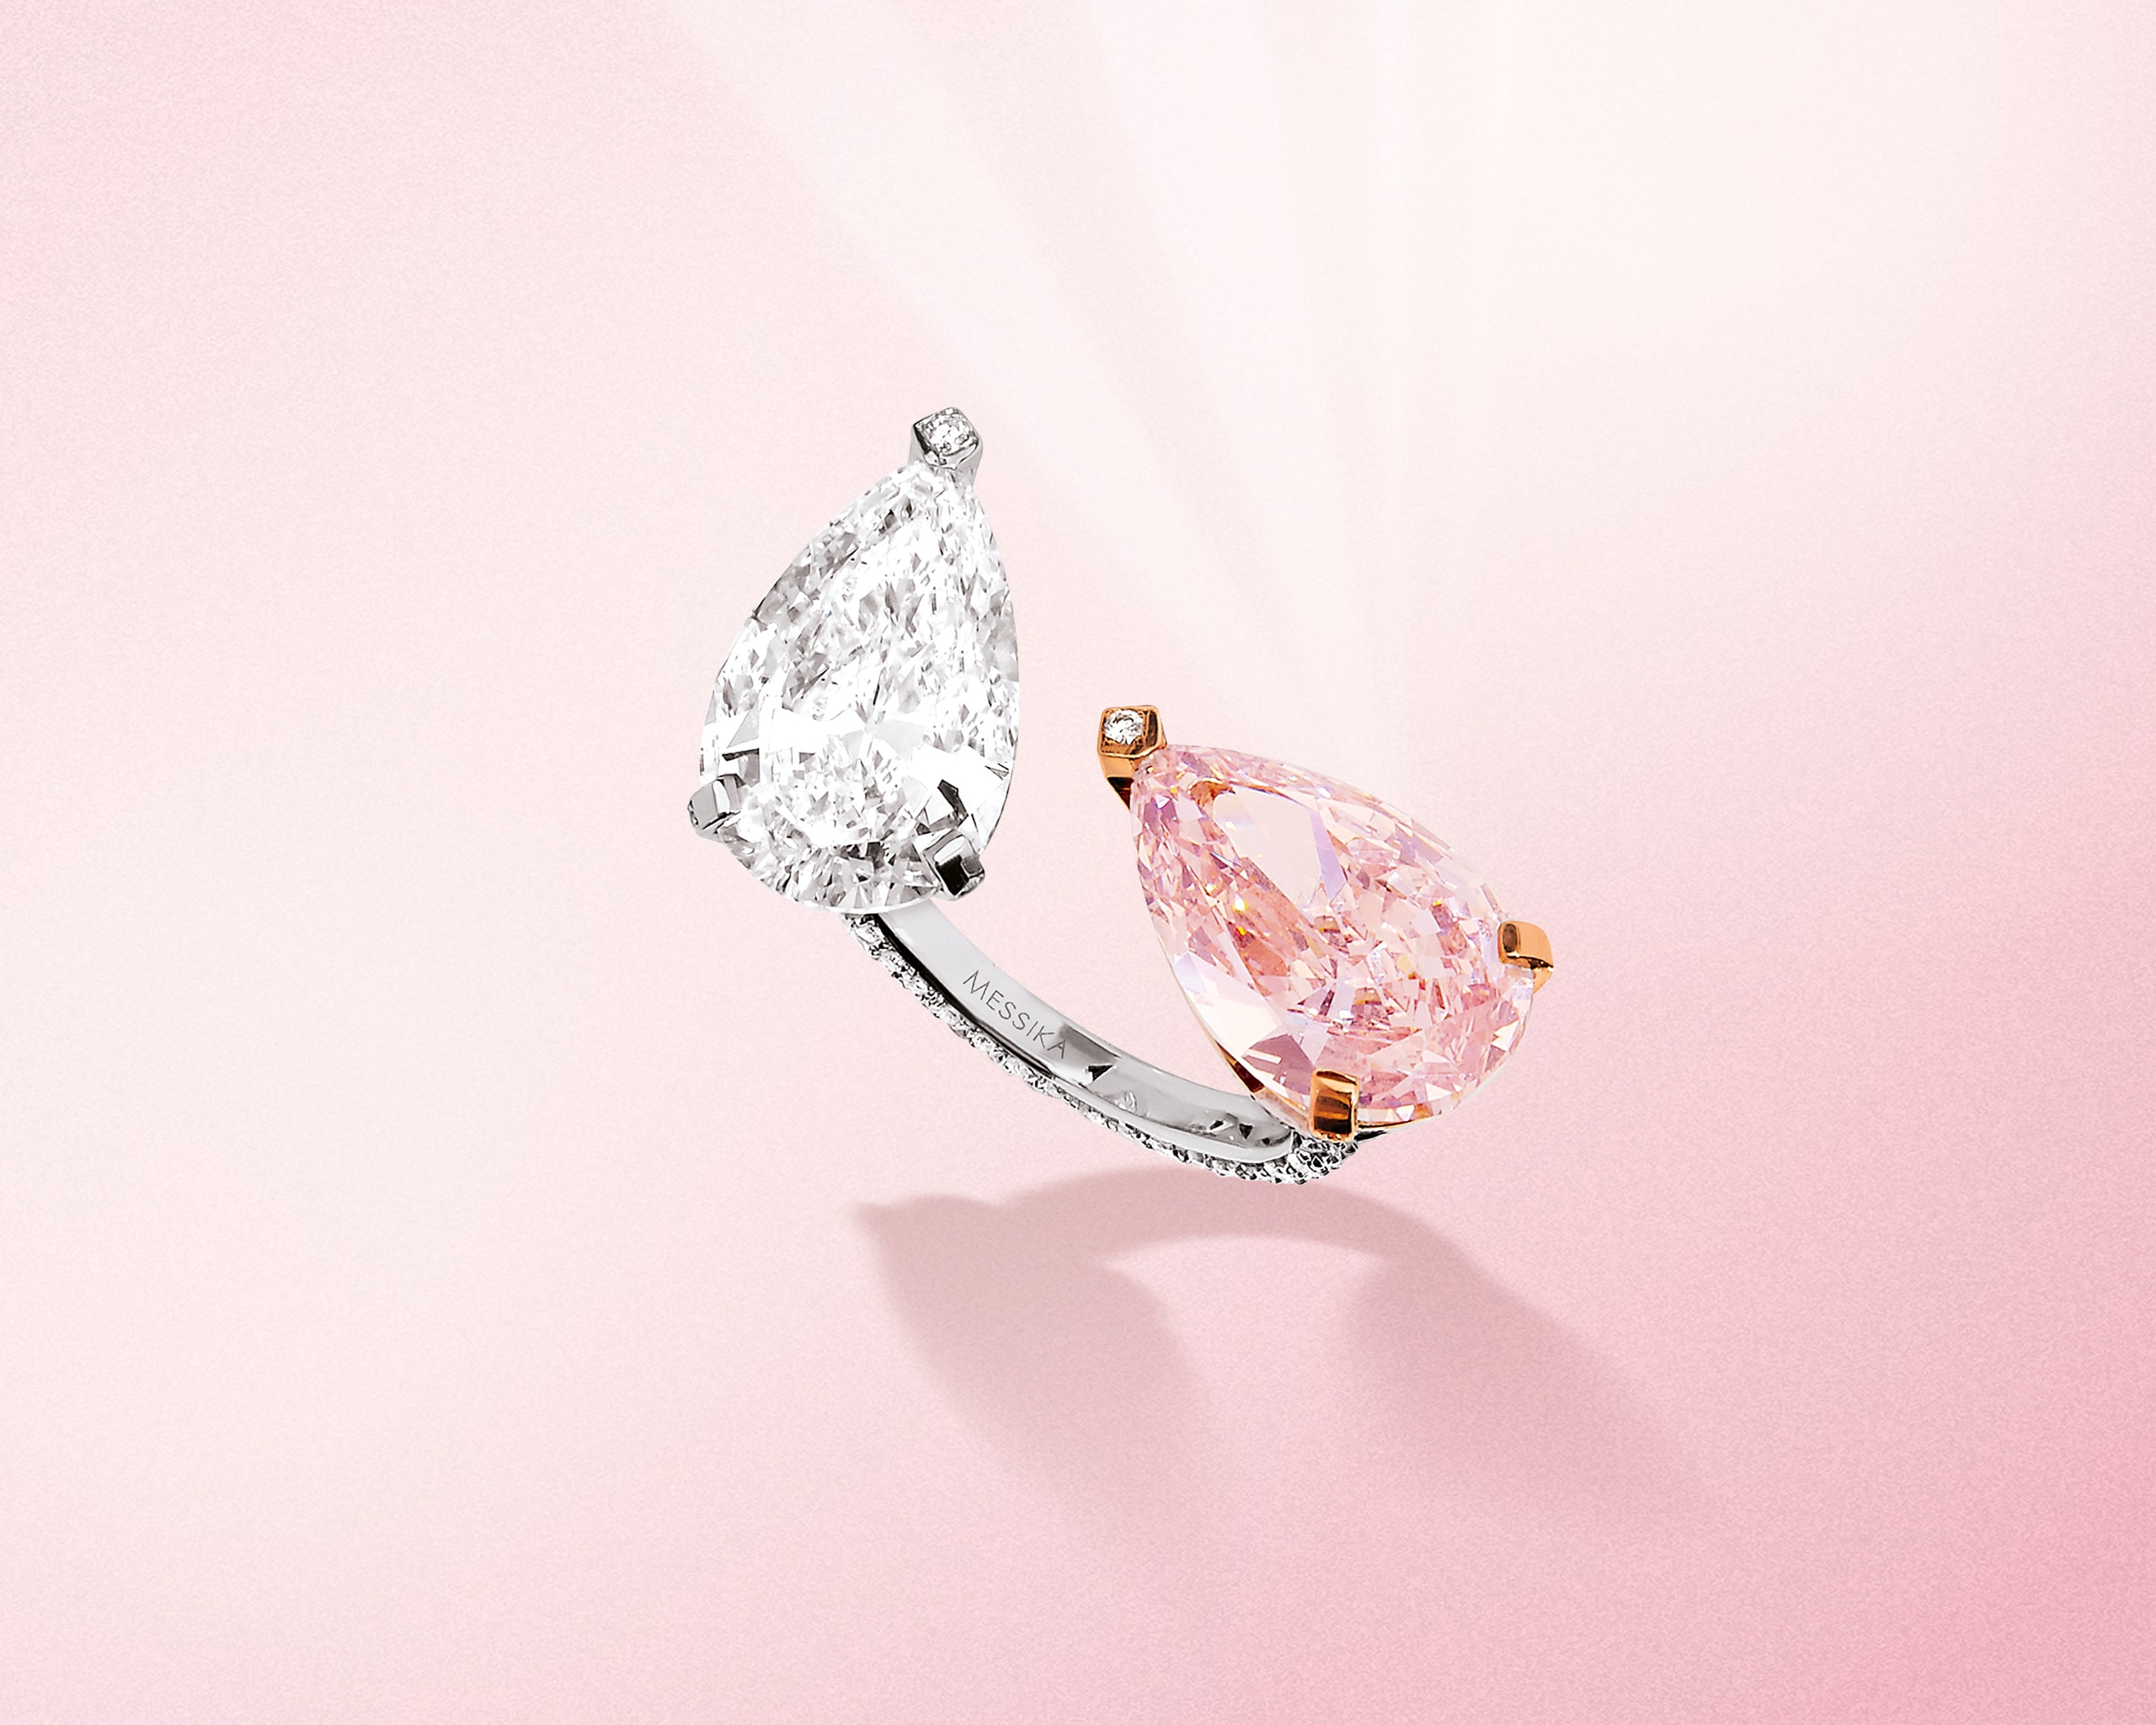 Pear shaped white and pink diamond ring in a toi et moi setting on a platinum band from Messika